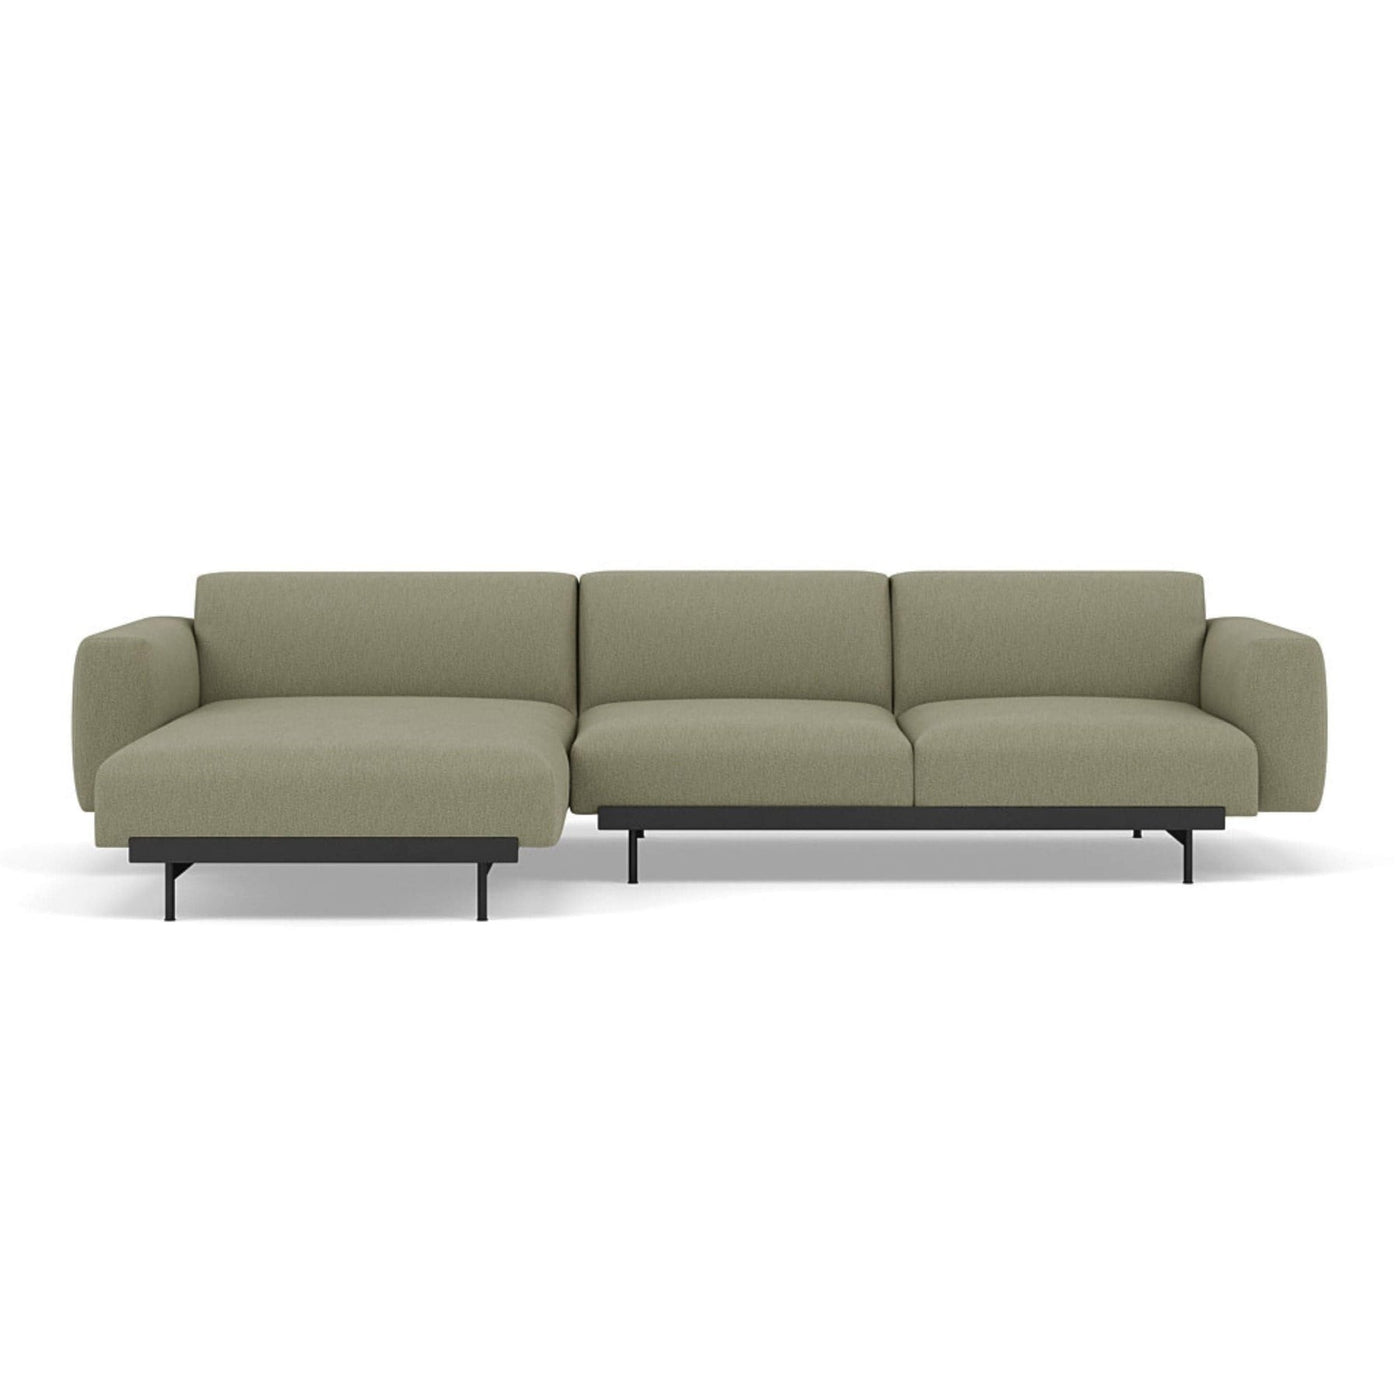 Muuto In Situ Sofa 3 seater configuration 7 in clay 15 fabric. Made to order at someday designs. #colour_clay-15